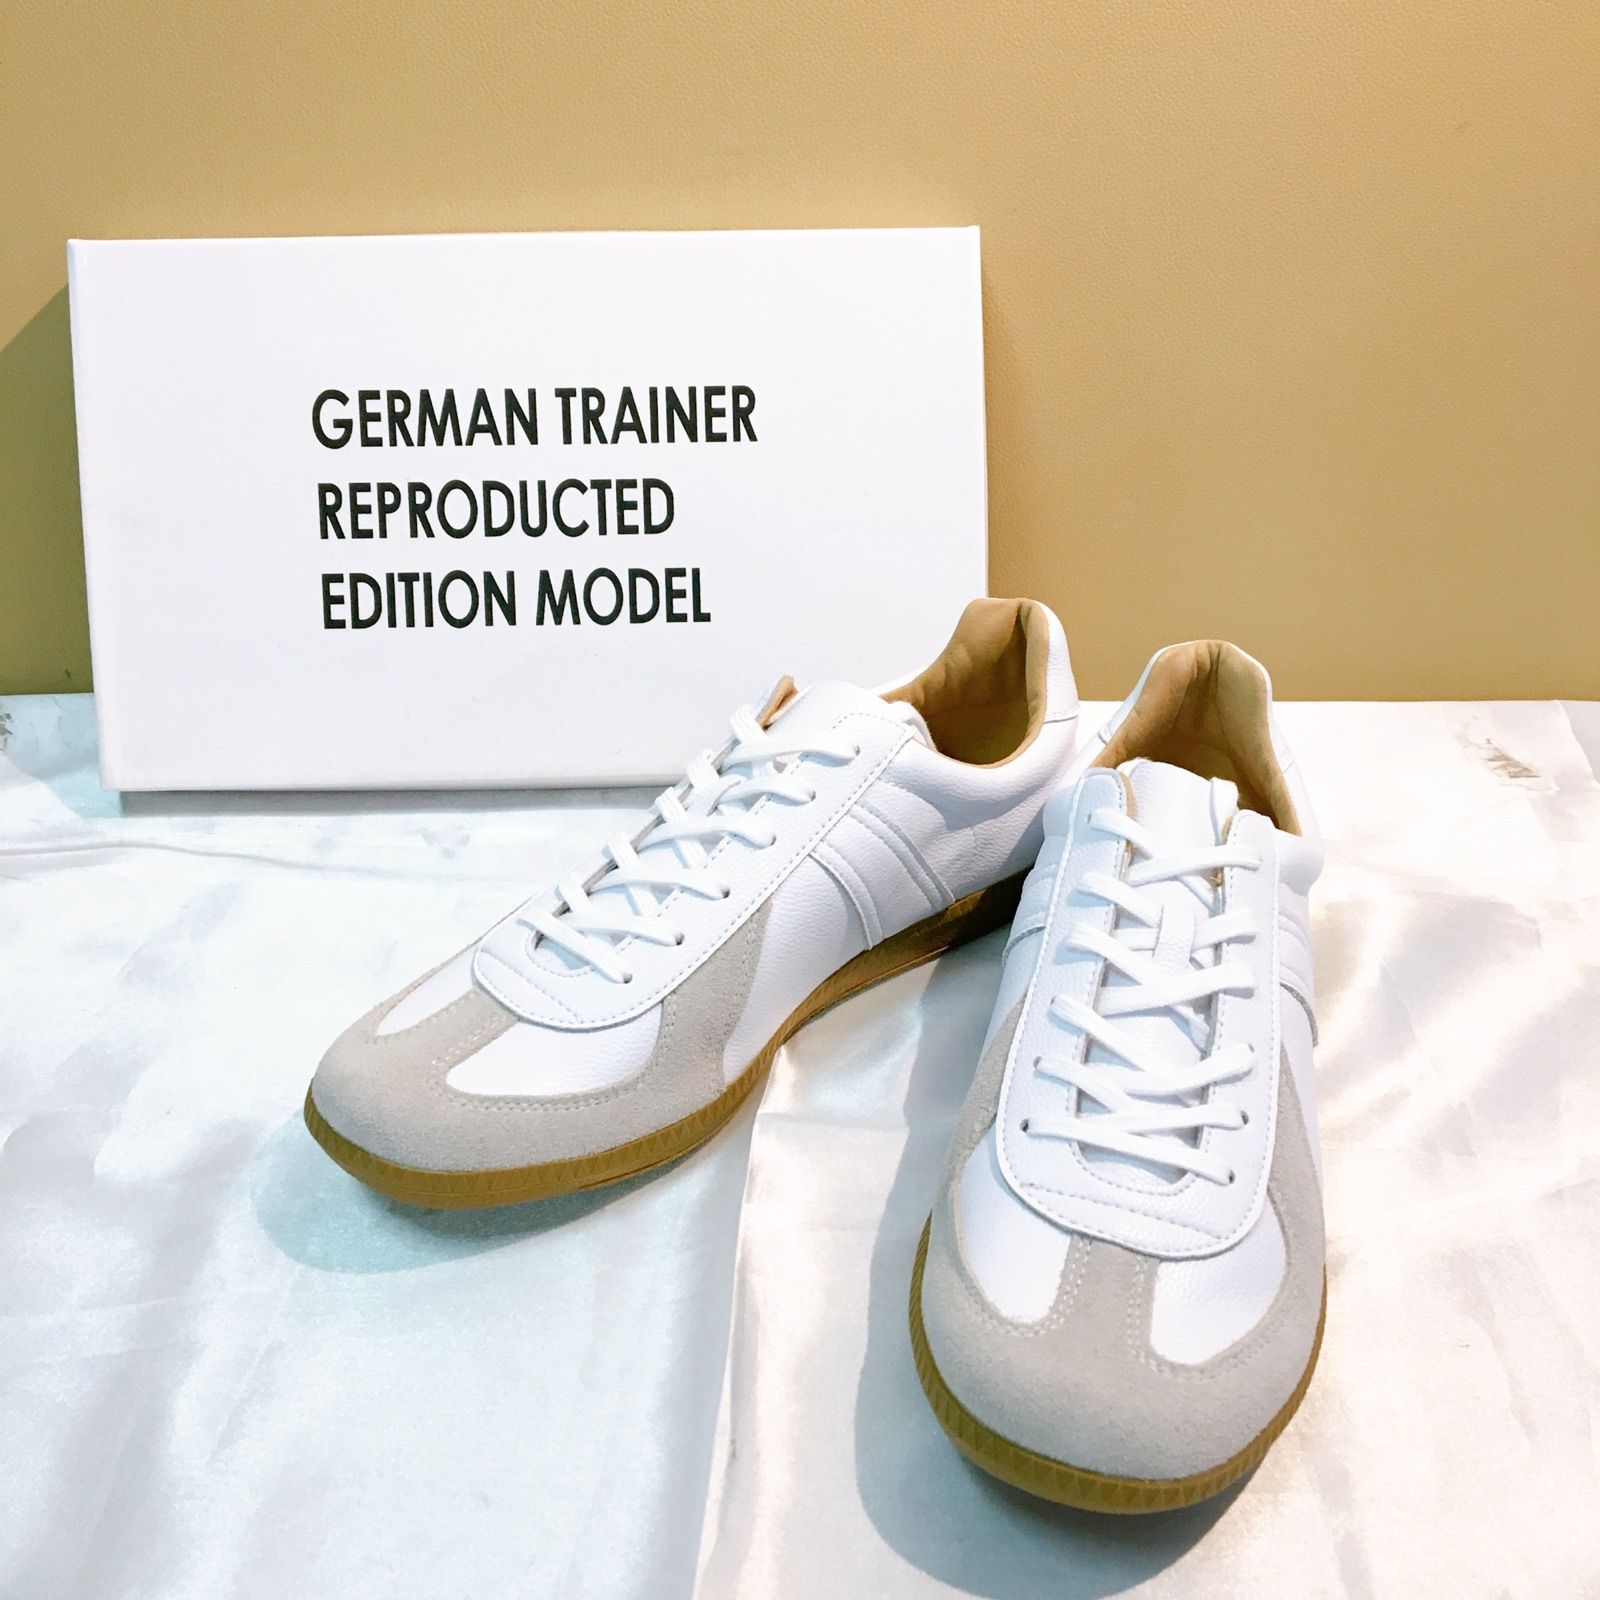 GERMAN TRAINER REPRODUCTED EDITION MODEL